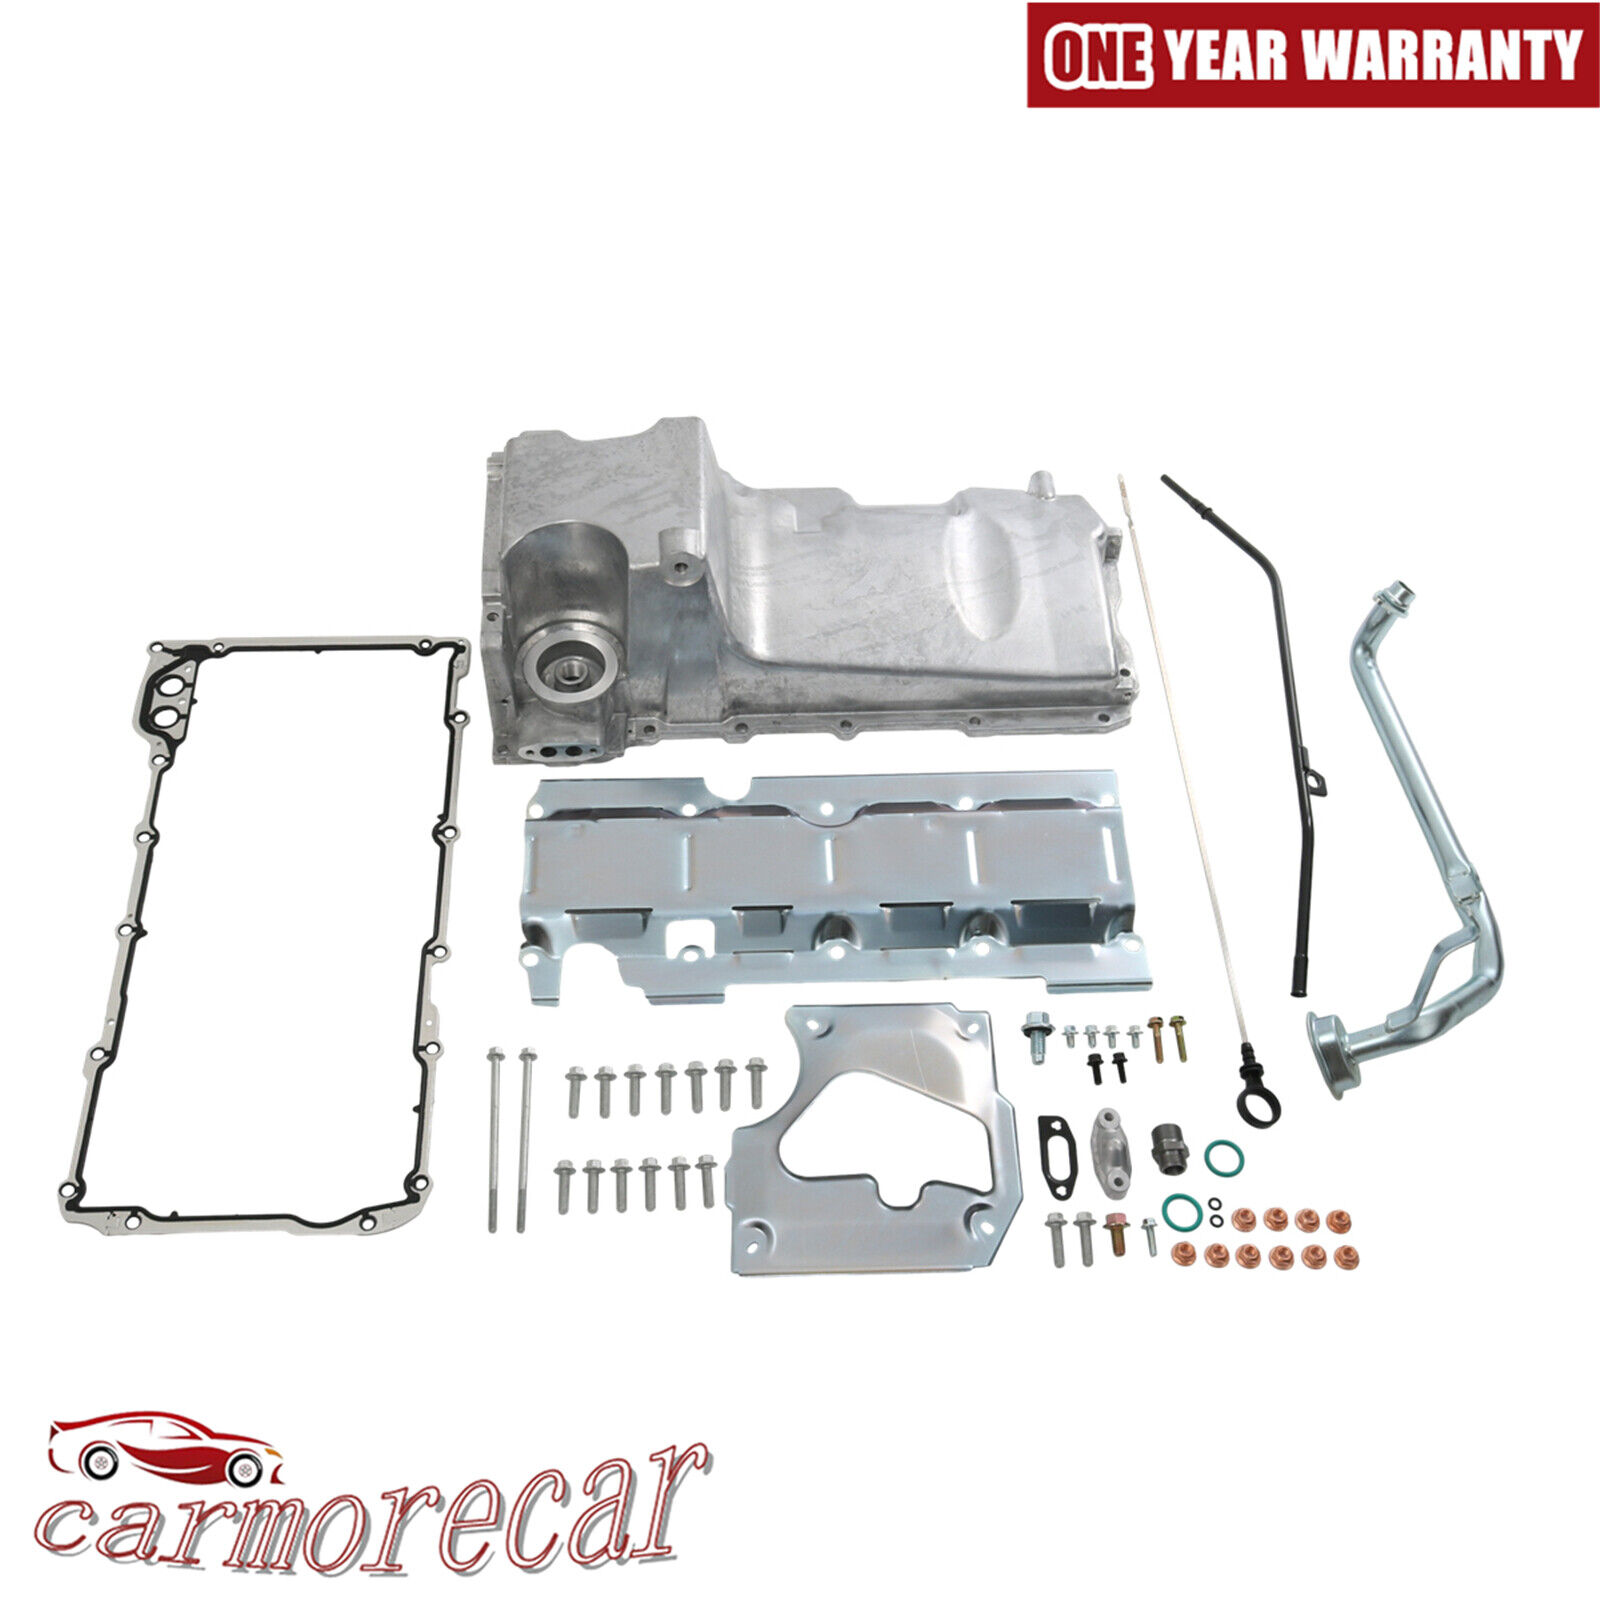 Engine Oil Pan Kit For Chevy GM LS1 LS3 LSA LSX 19212593 Performance Muscle Car